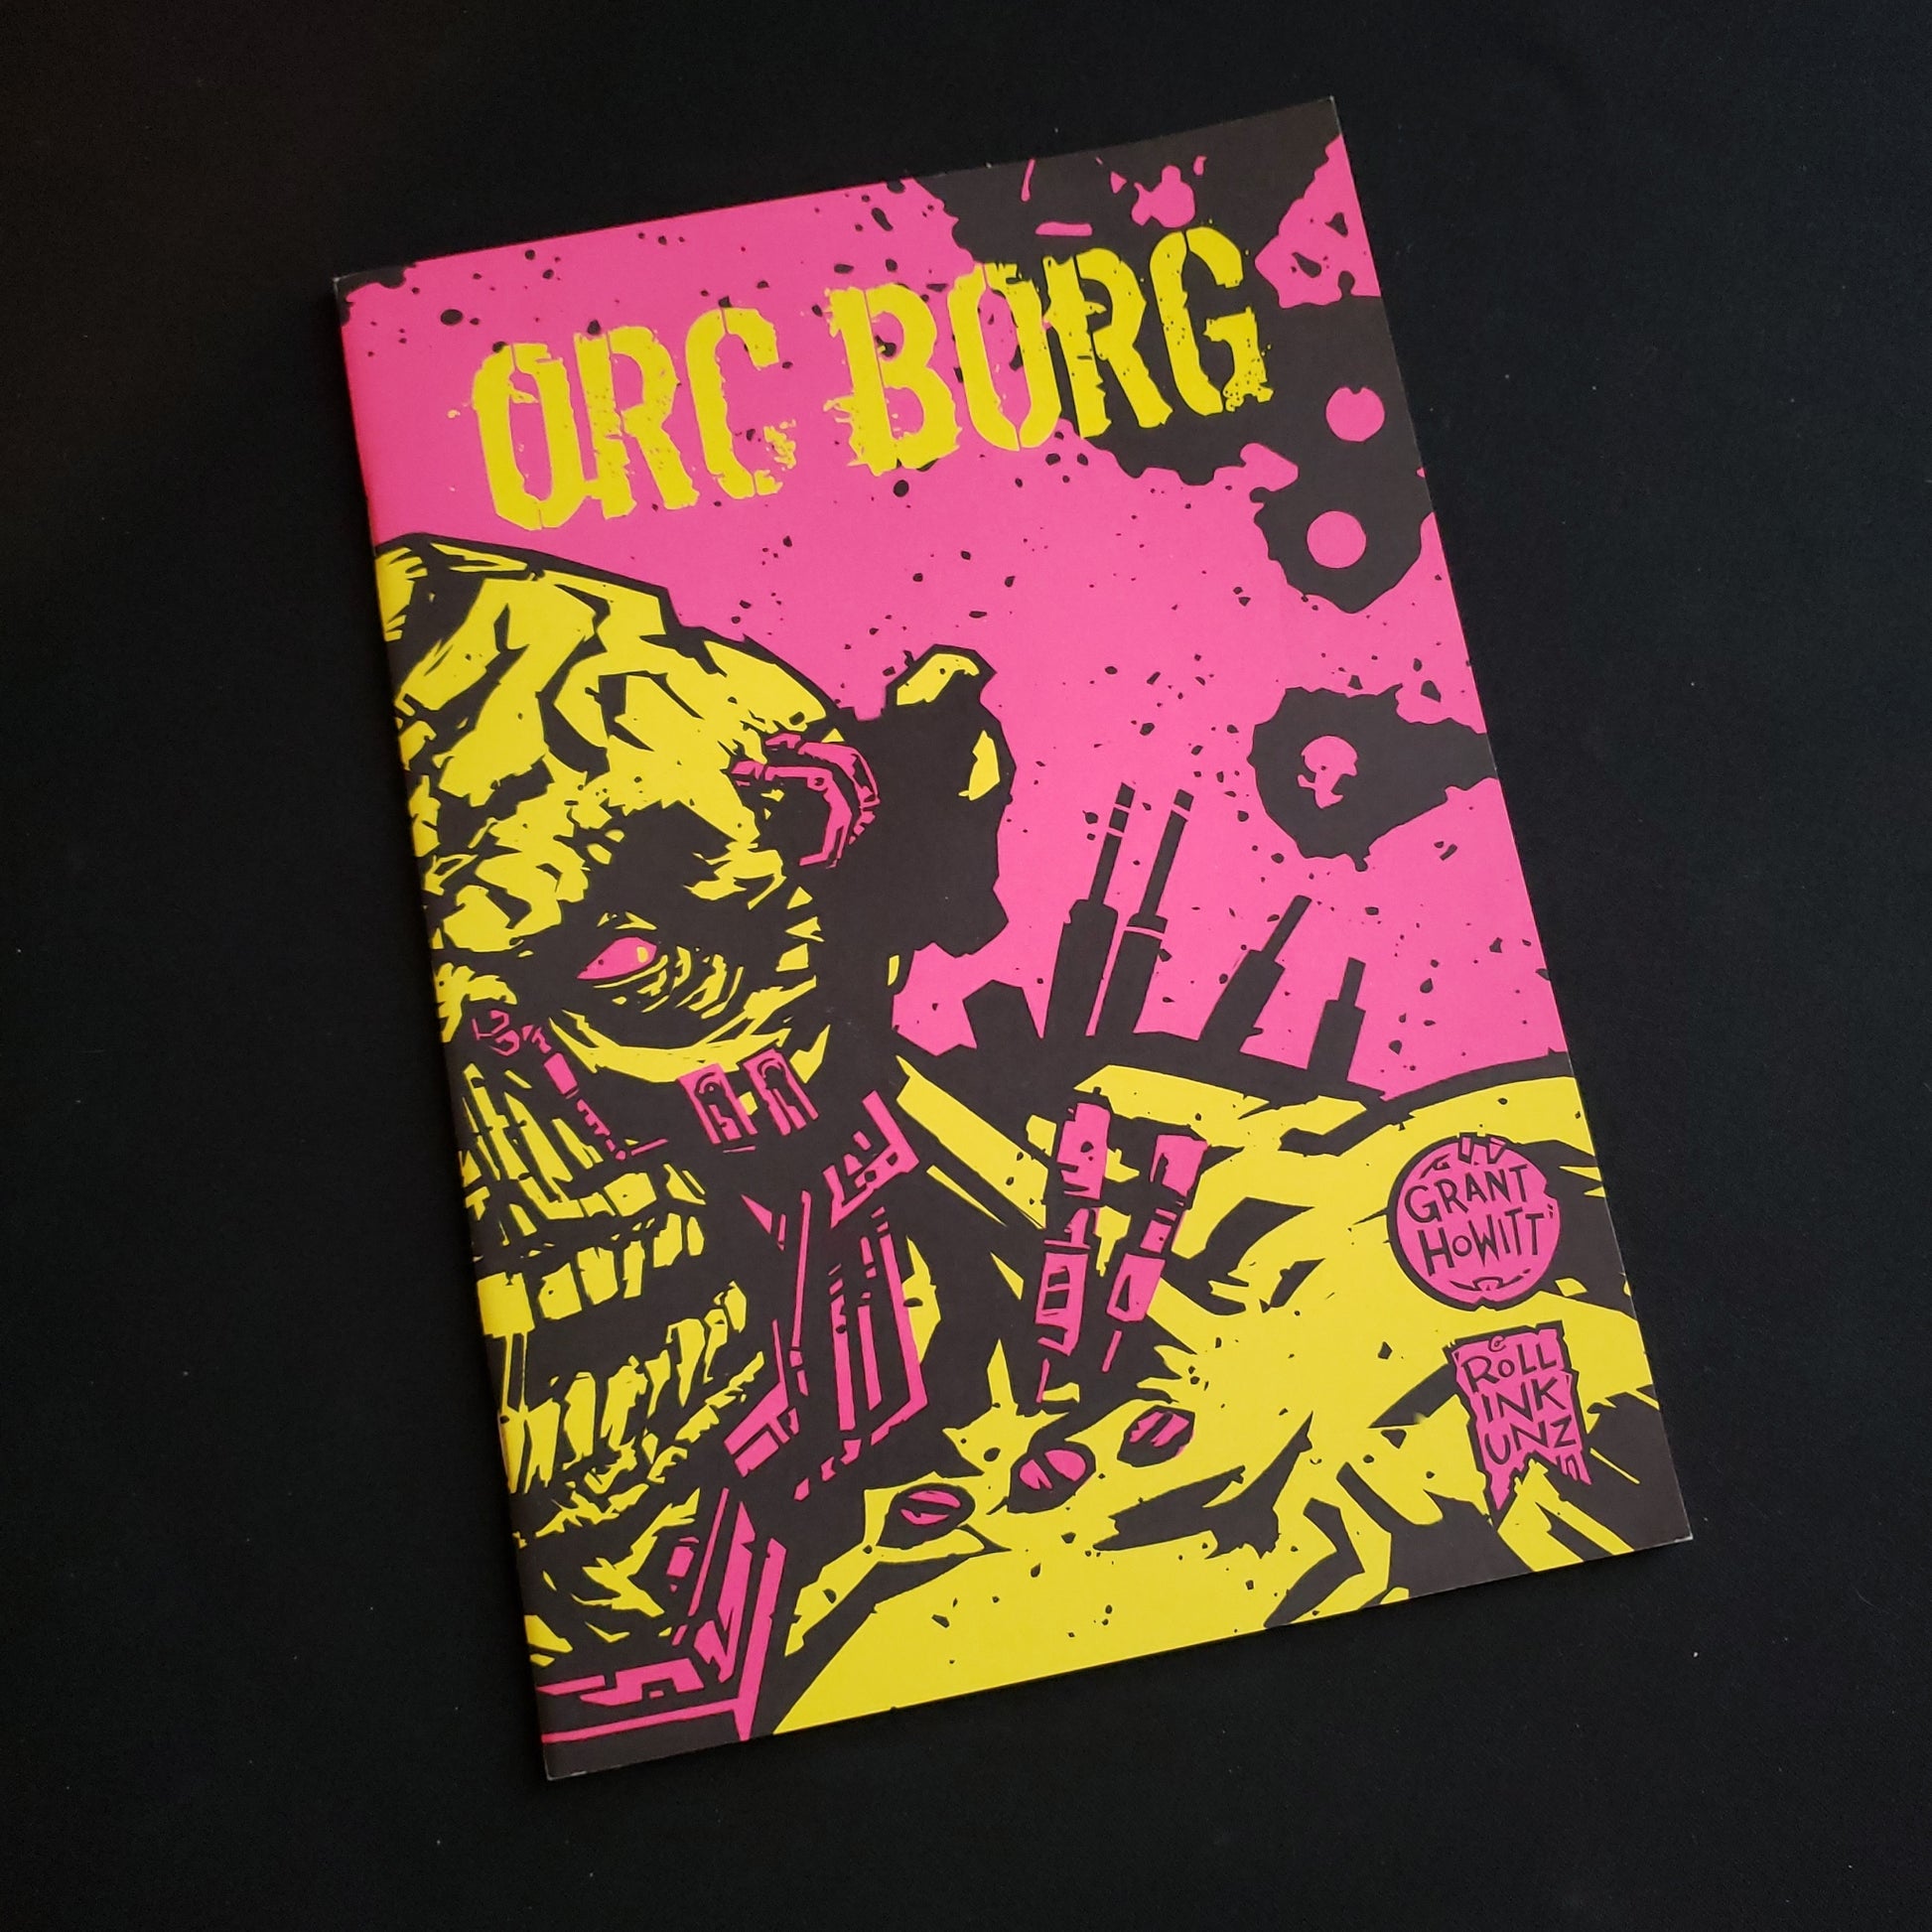 Image shows the front cover of the Orc Borg roleplaying game book